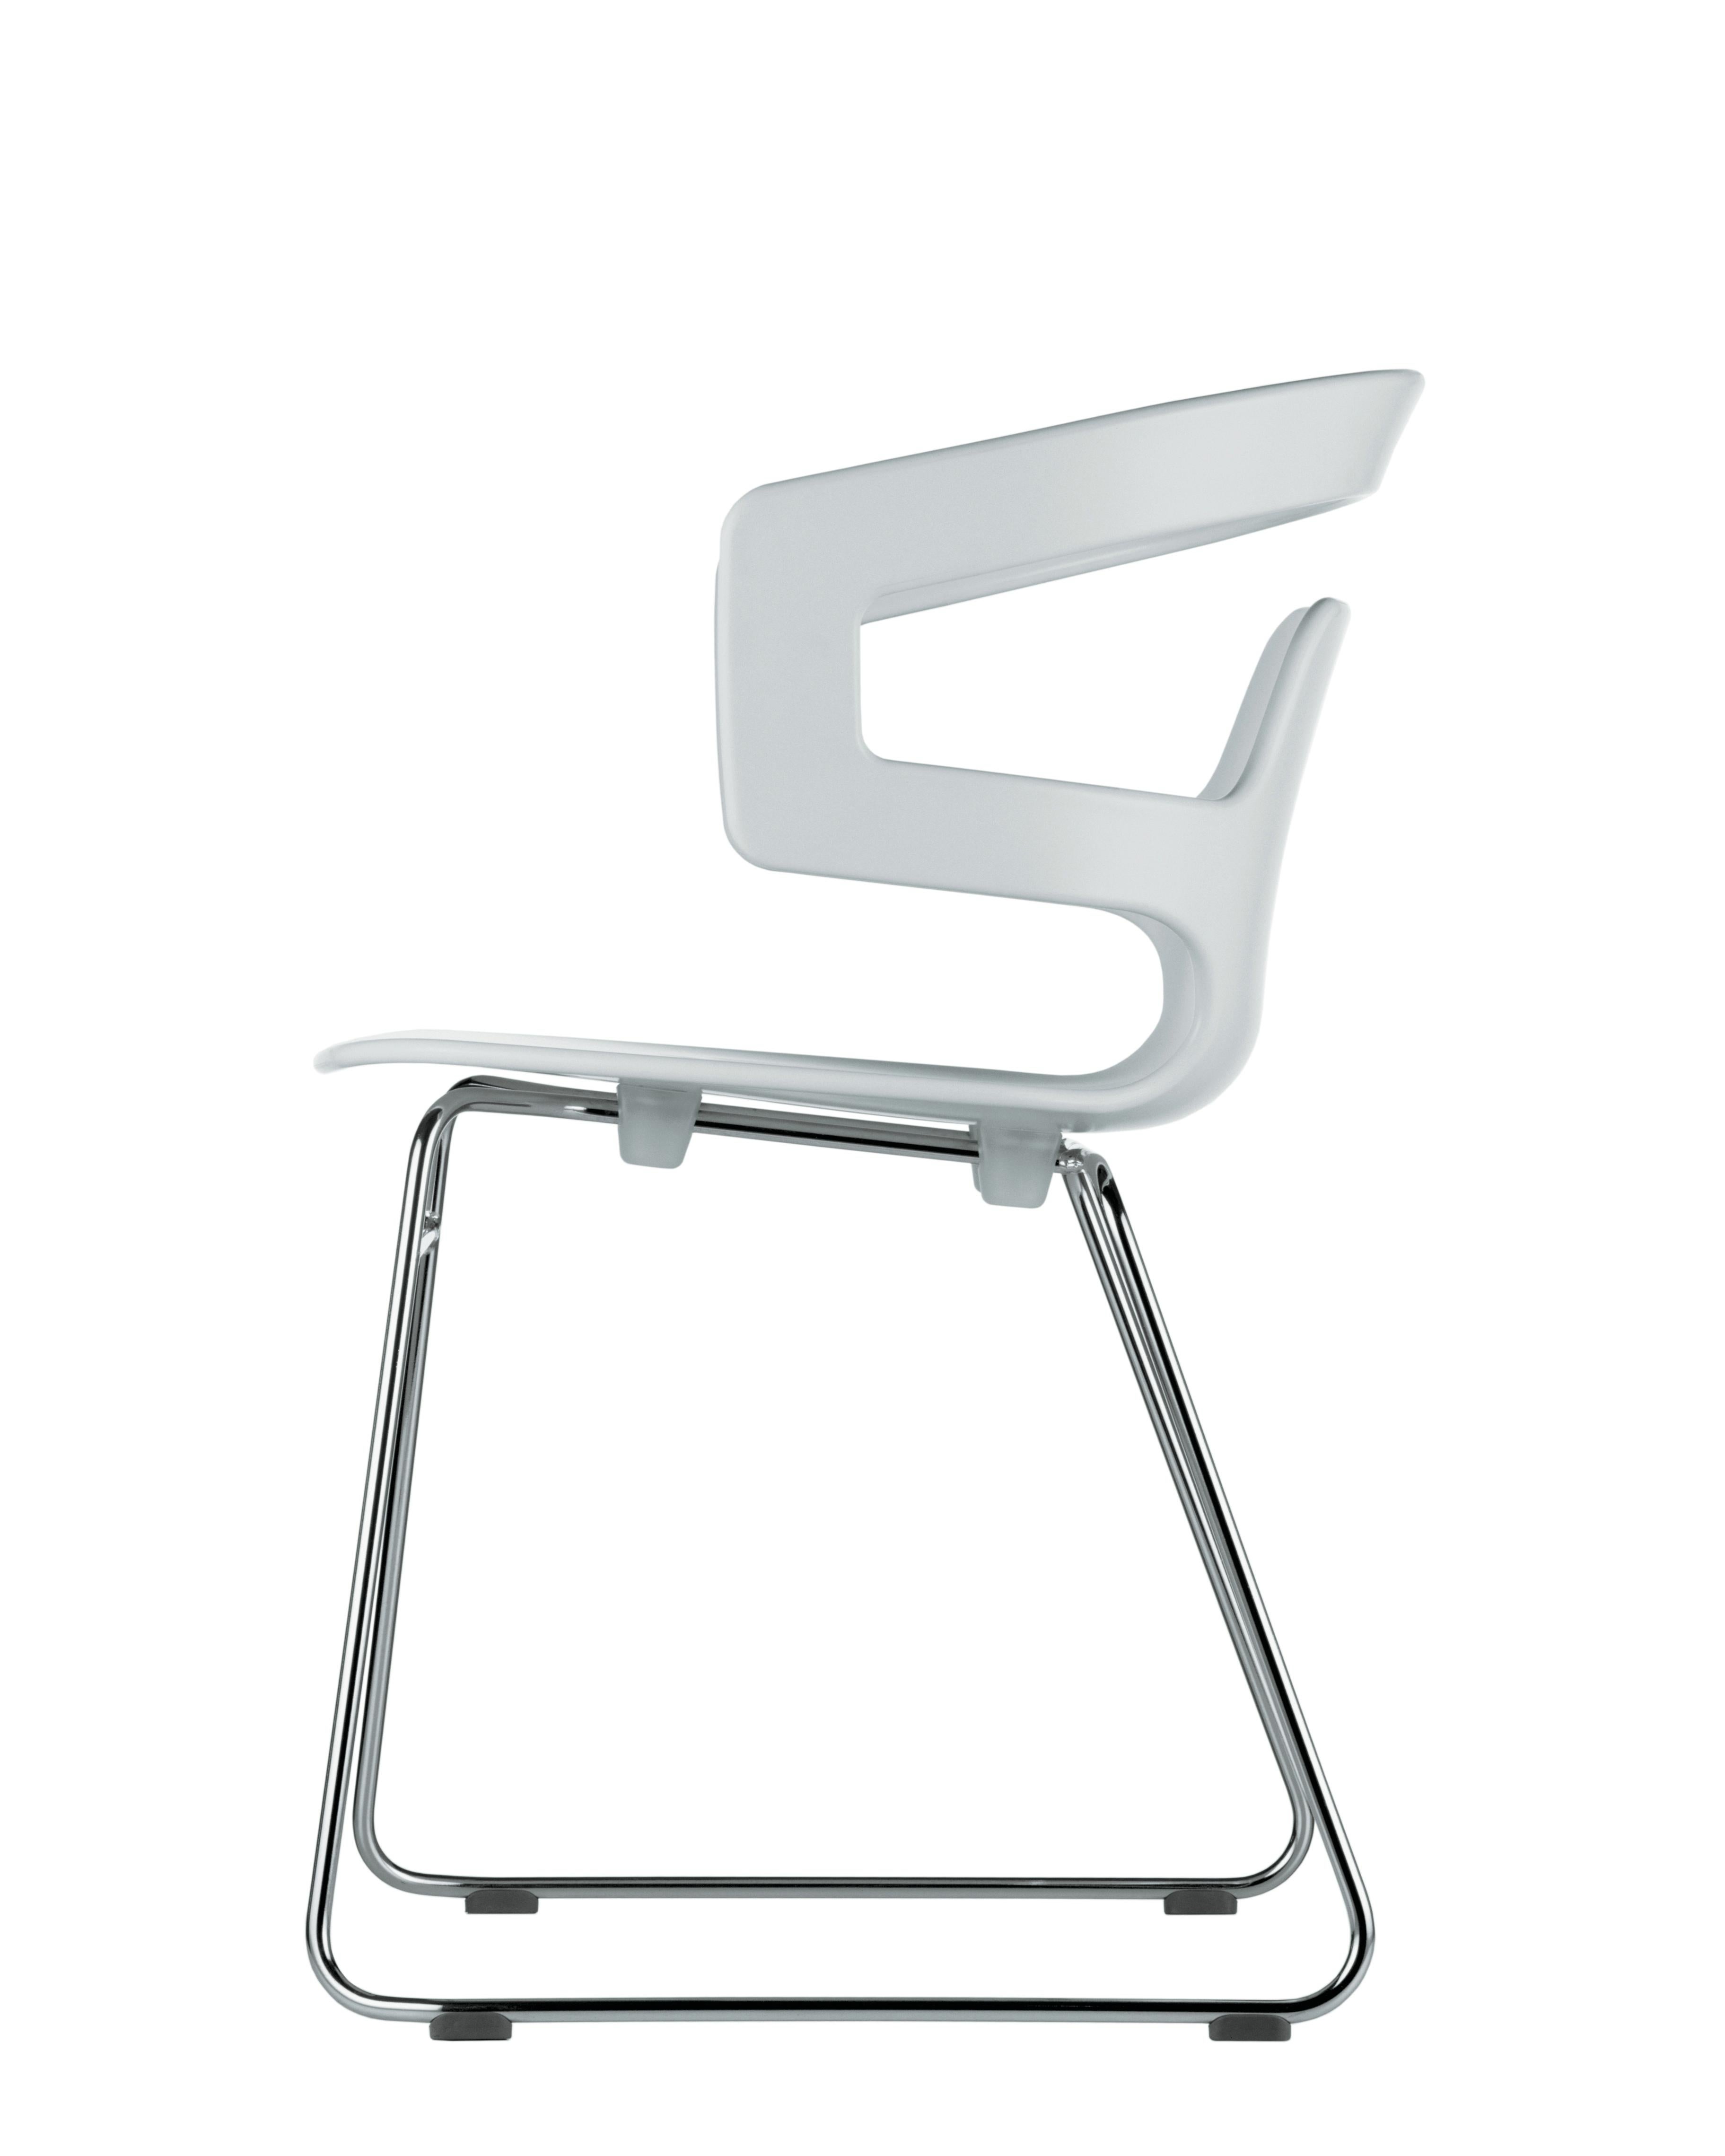 Alias 501 Segesta Sledge Chair in White and Chromed Steel Frame by Alfredo Häberli

Stacking chair with arms with structure in lacqueredor chromed steel; seat and back in solid plastic material.

Born in Buenos Aires in 1964, he moved to Zurich